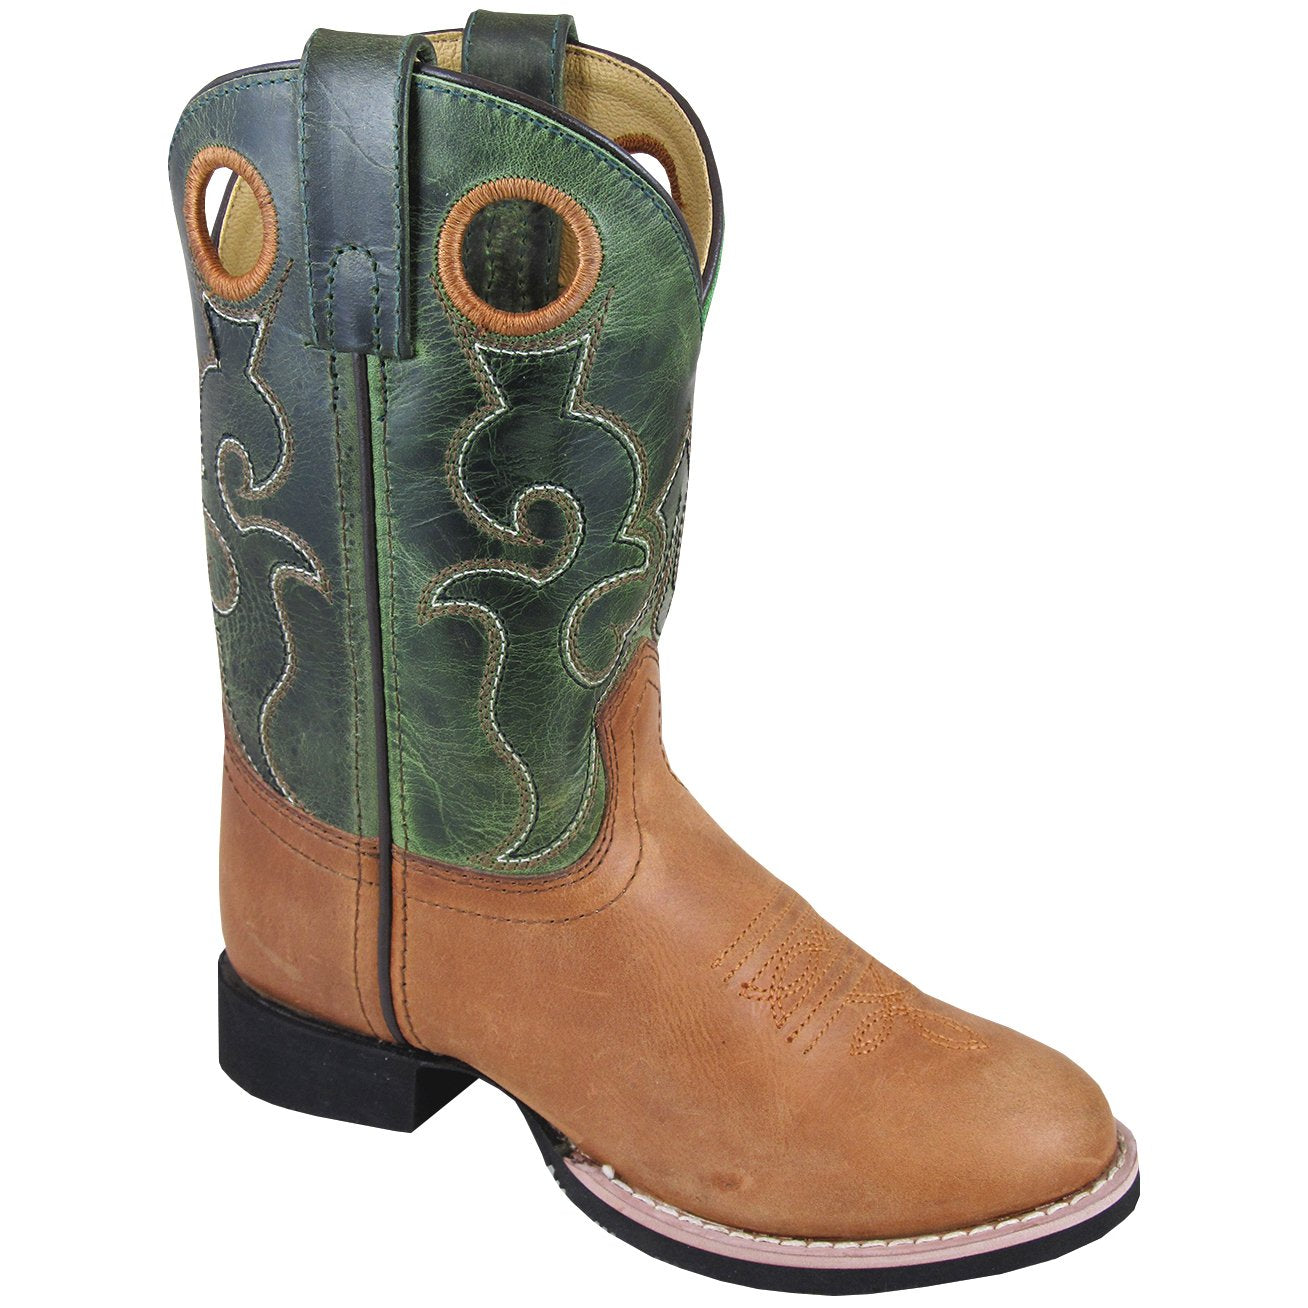 Smoky Mountain Children's Rick Brown Waxed/Green Crackle Cowboy Boot